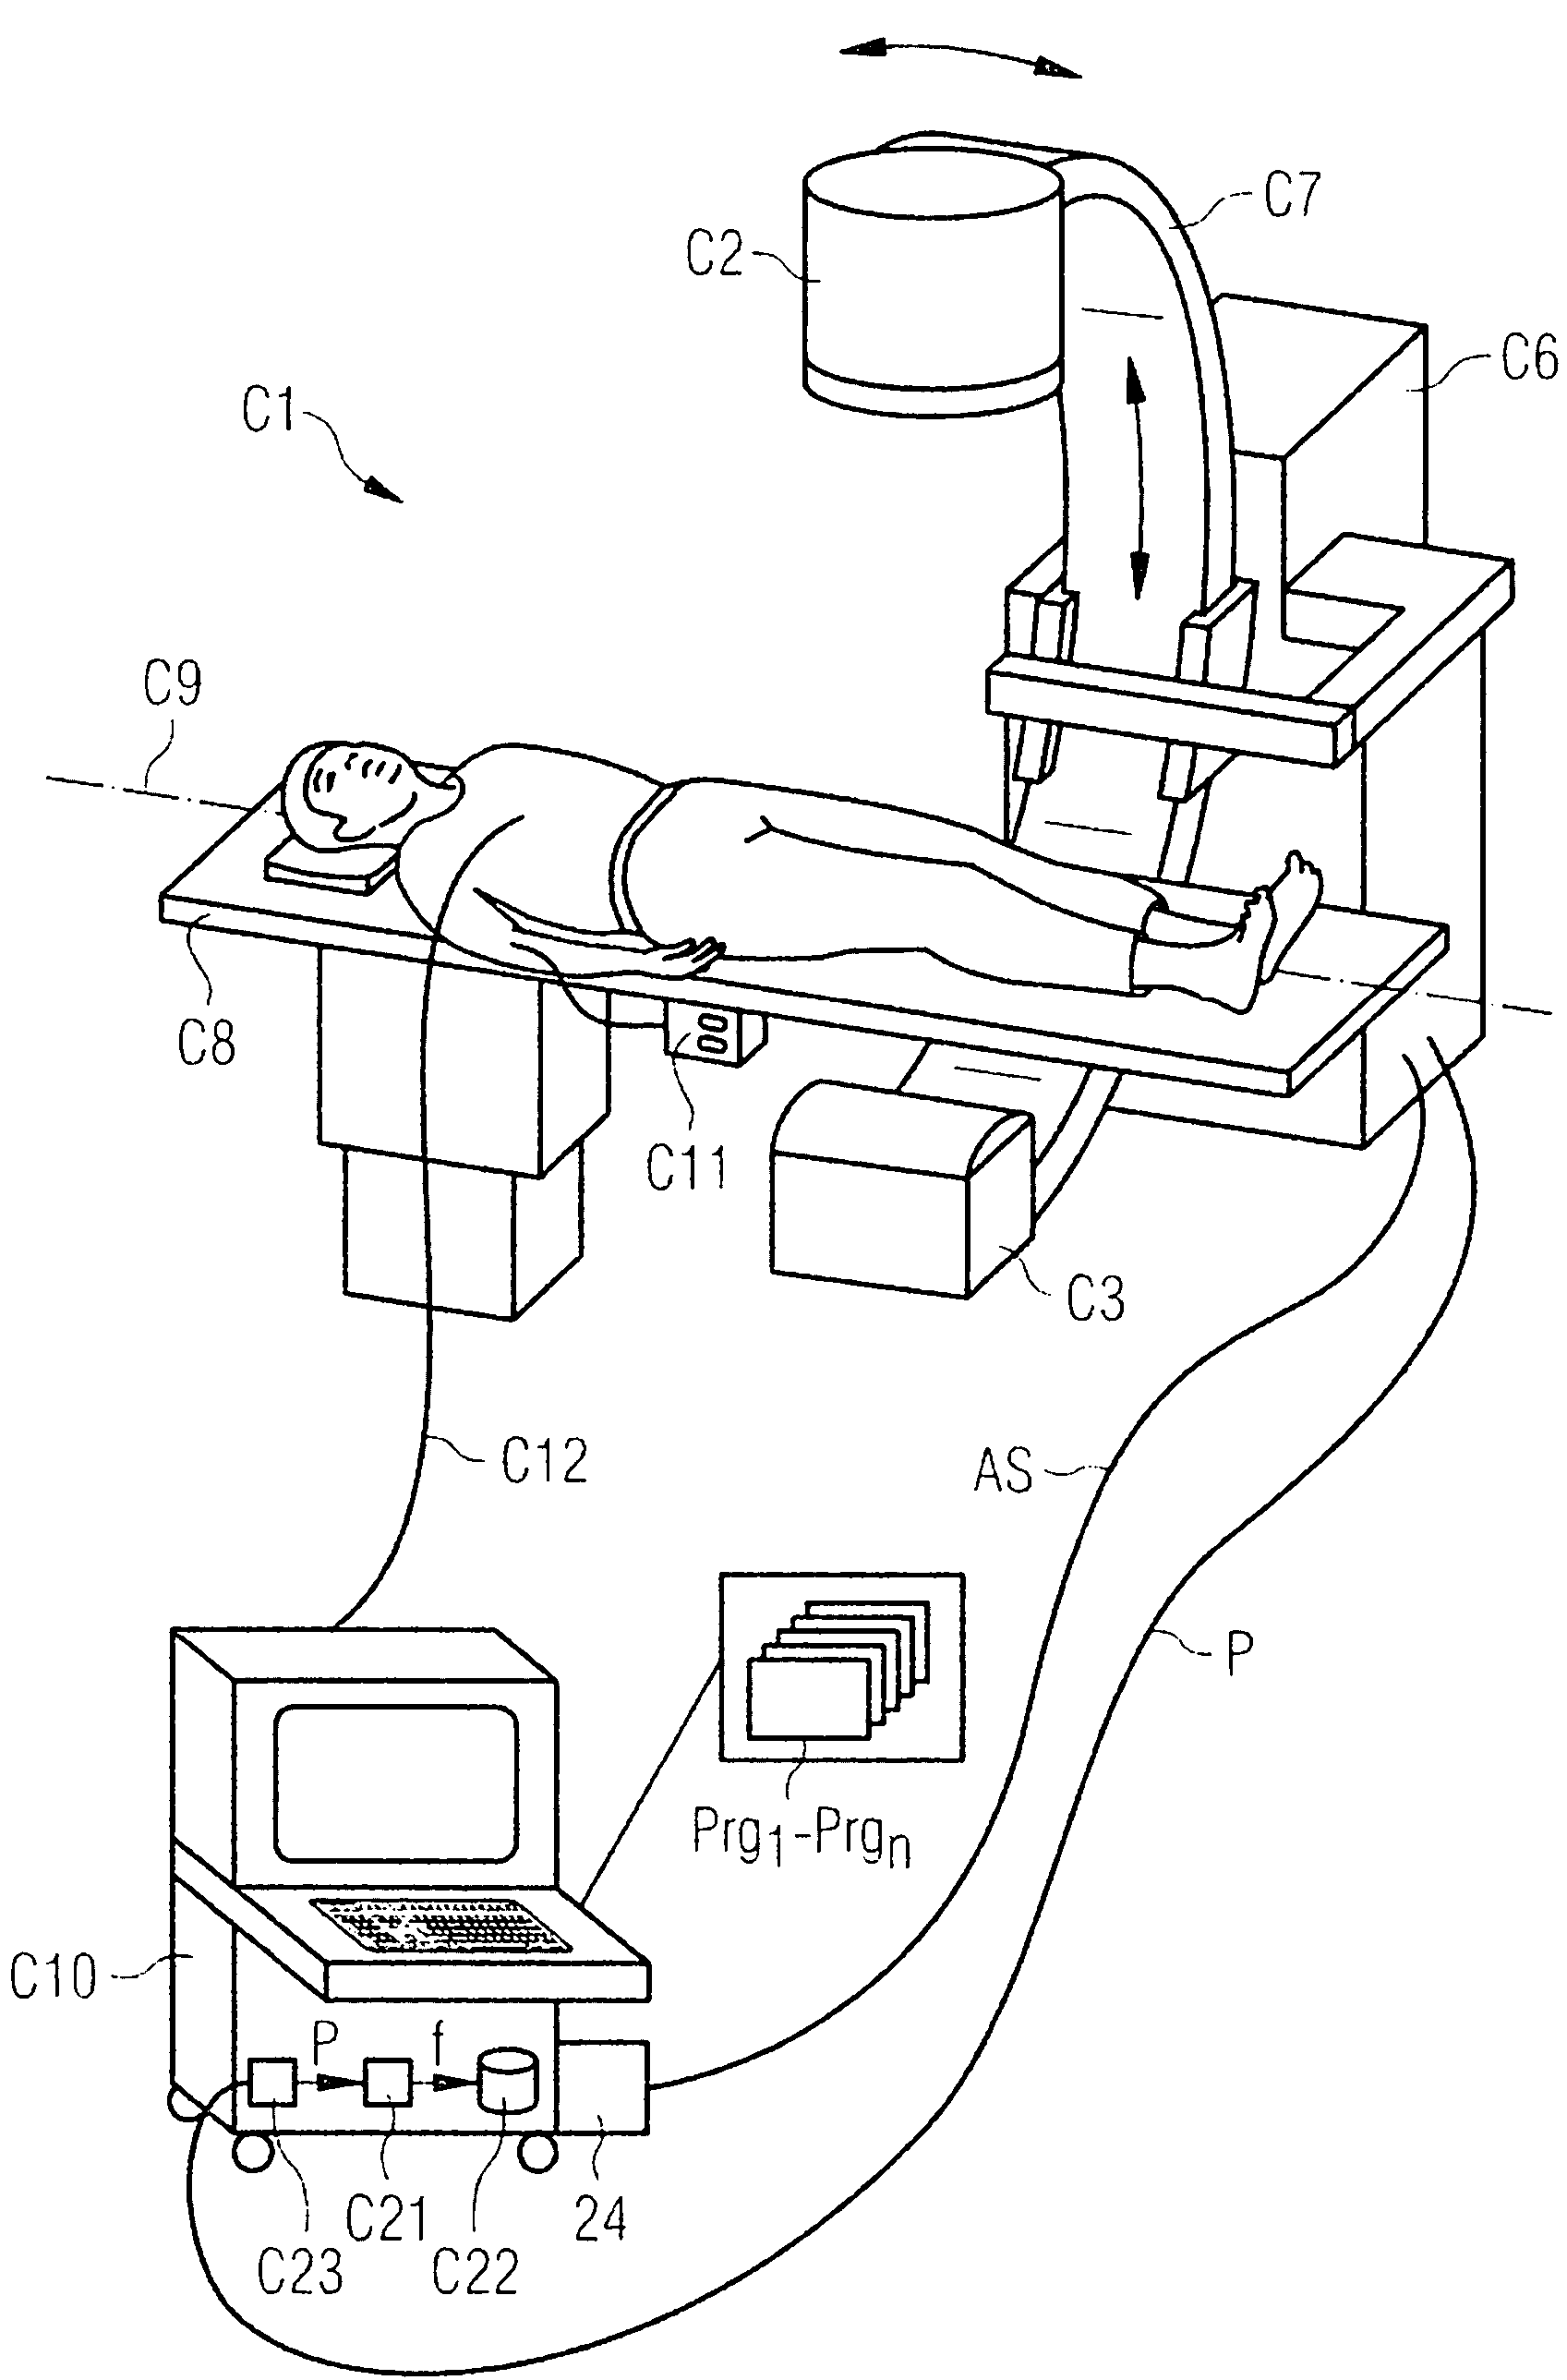 CT measurement with multiple X-ray sources